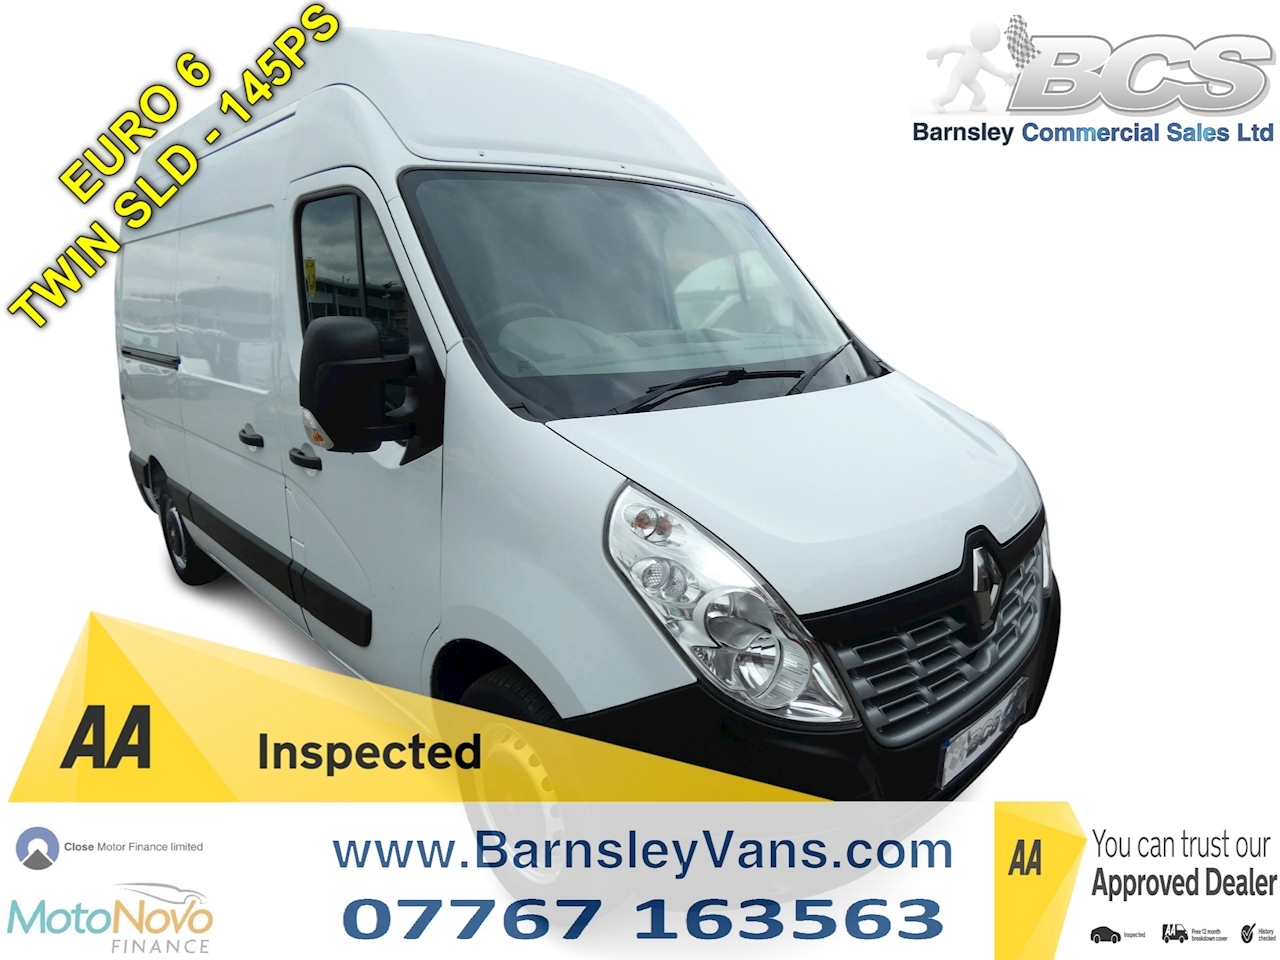 2017 66 RENAULT MASTER BUSINESS 2.3DCI MWB HIGH ROOF TWIN SLD EURO 6 PANEL VAN